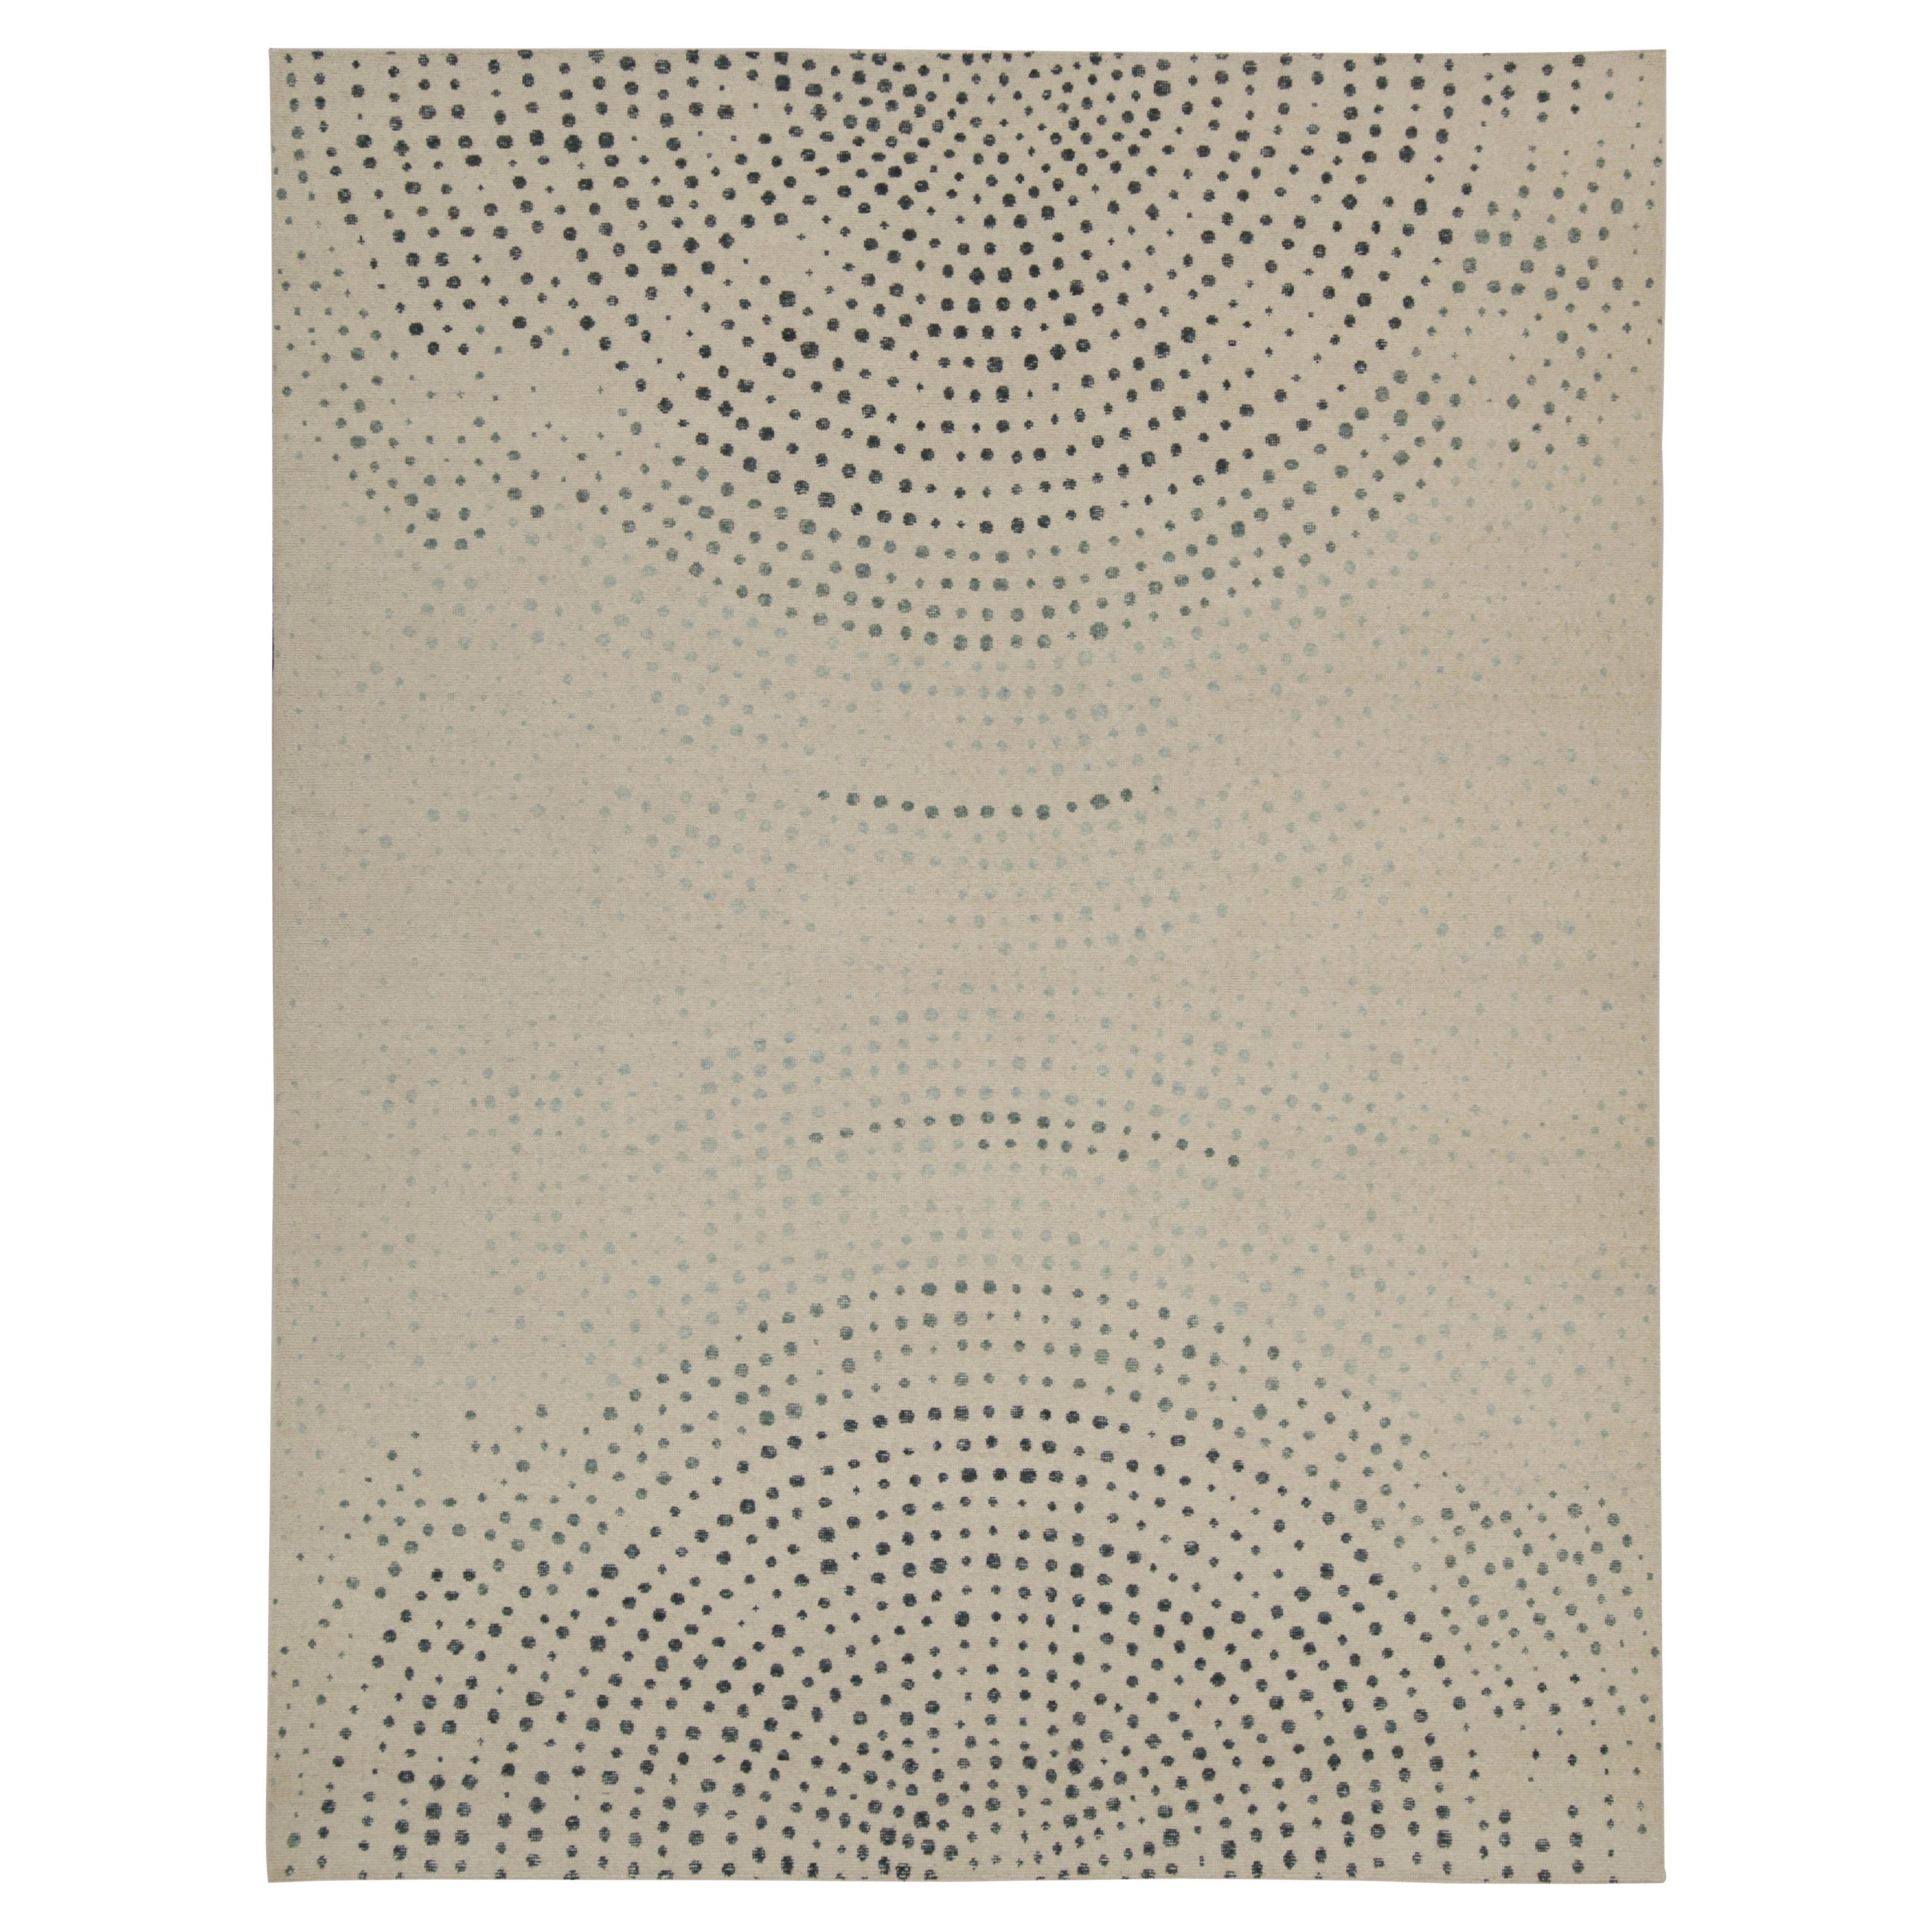 Rug & Kilim’s Distressed Style Abstract Rug in Beige, Blue & Green Dots Patterns For Sale